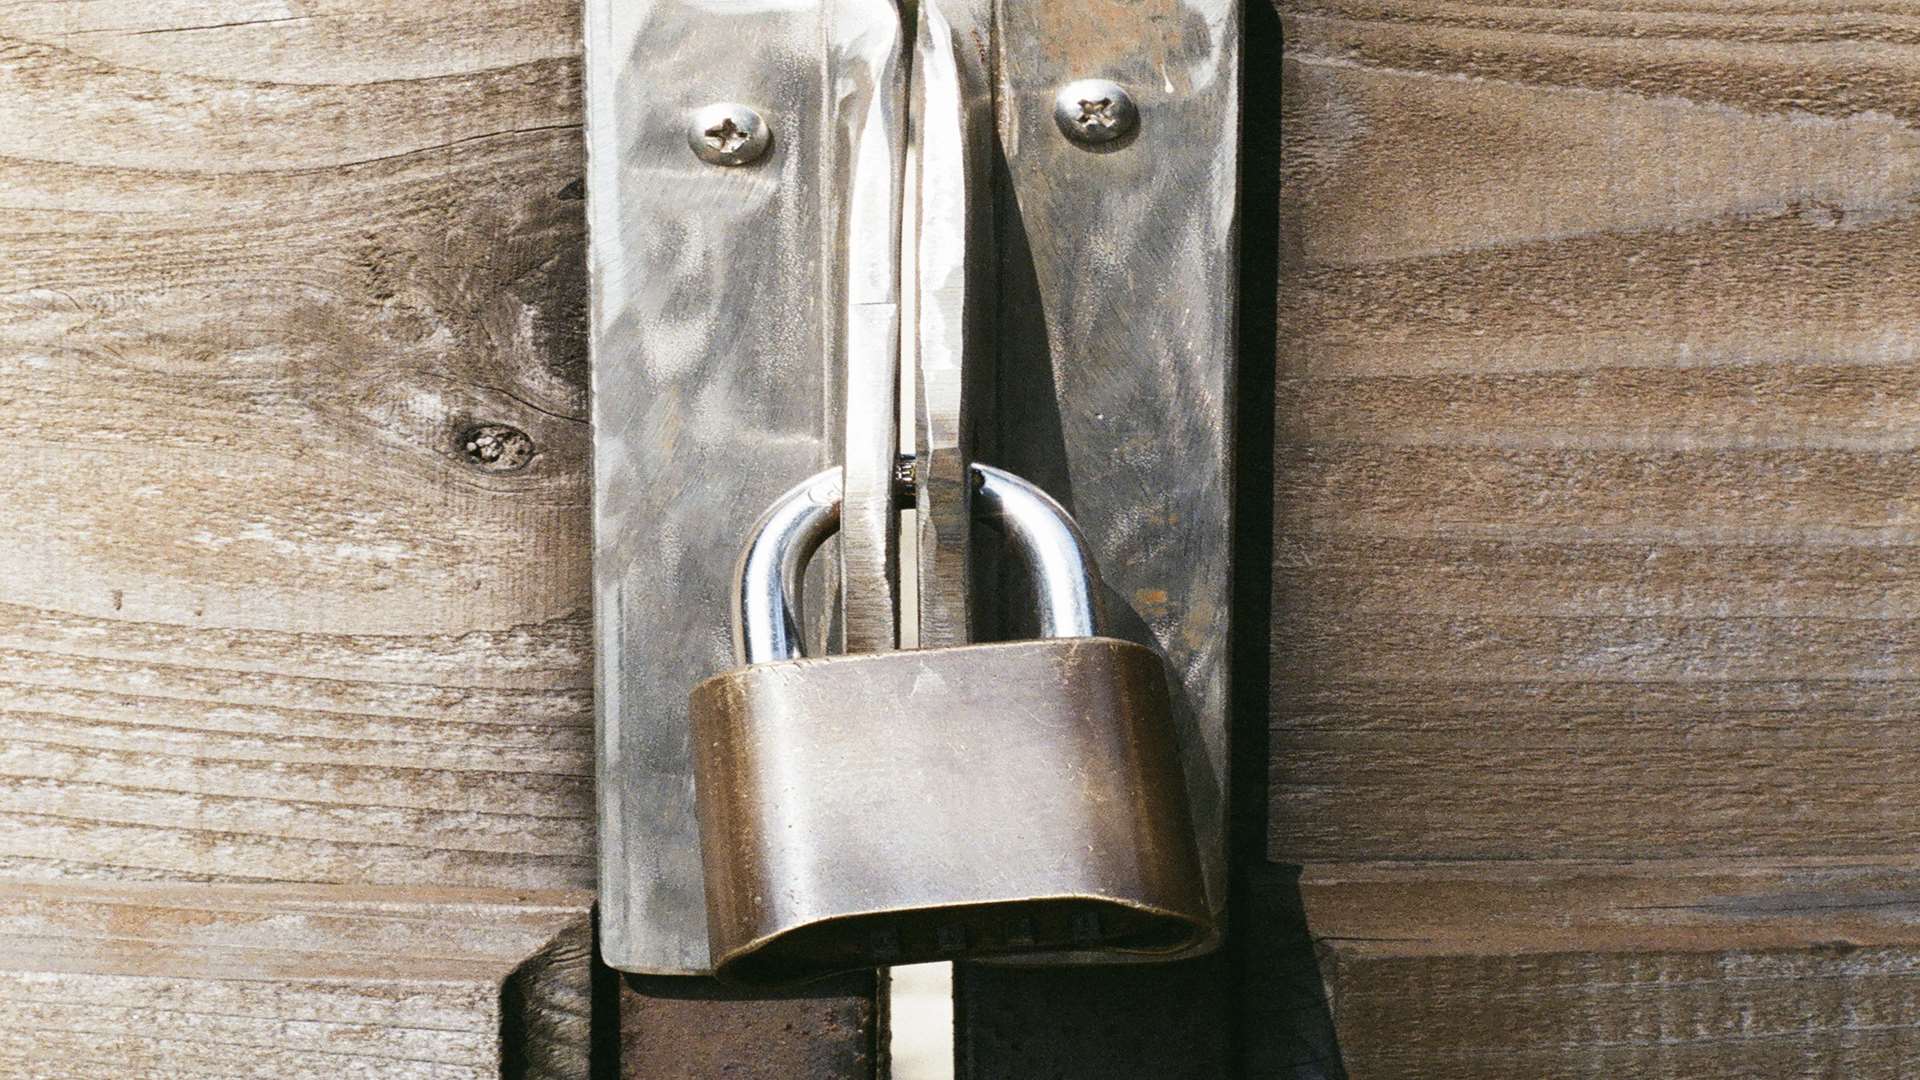 Padlocks on other sheds were also damaged. Picture: Thinkstock Image Library